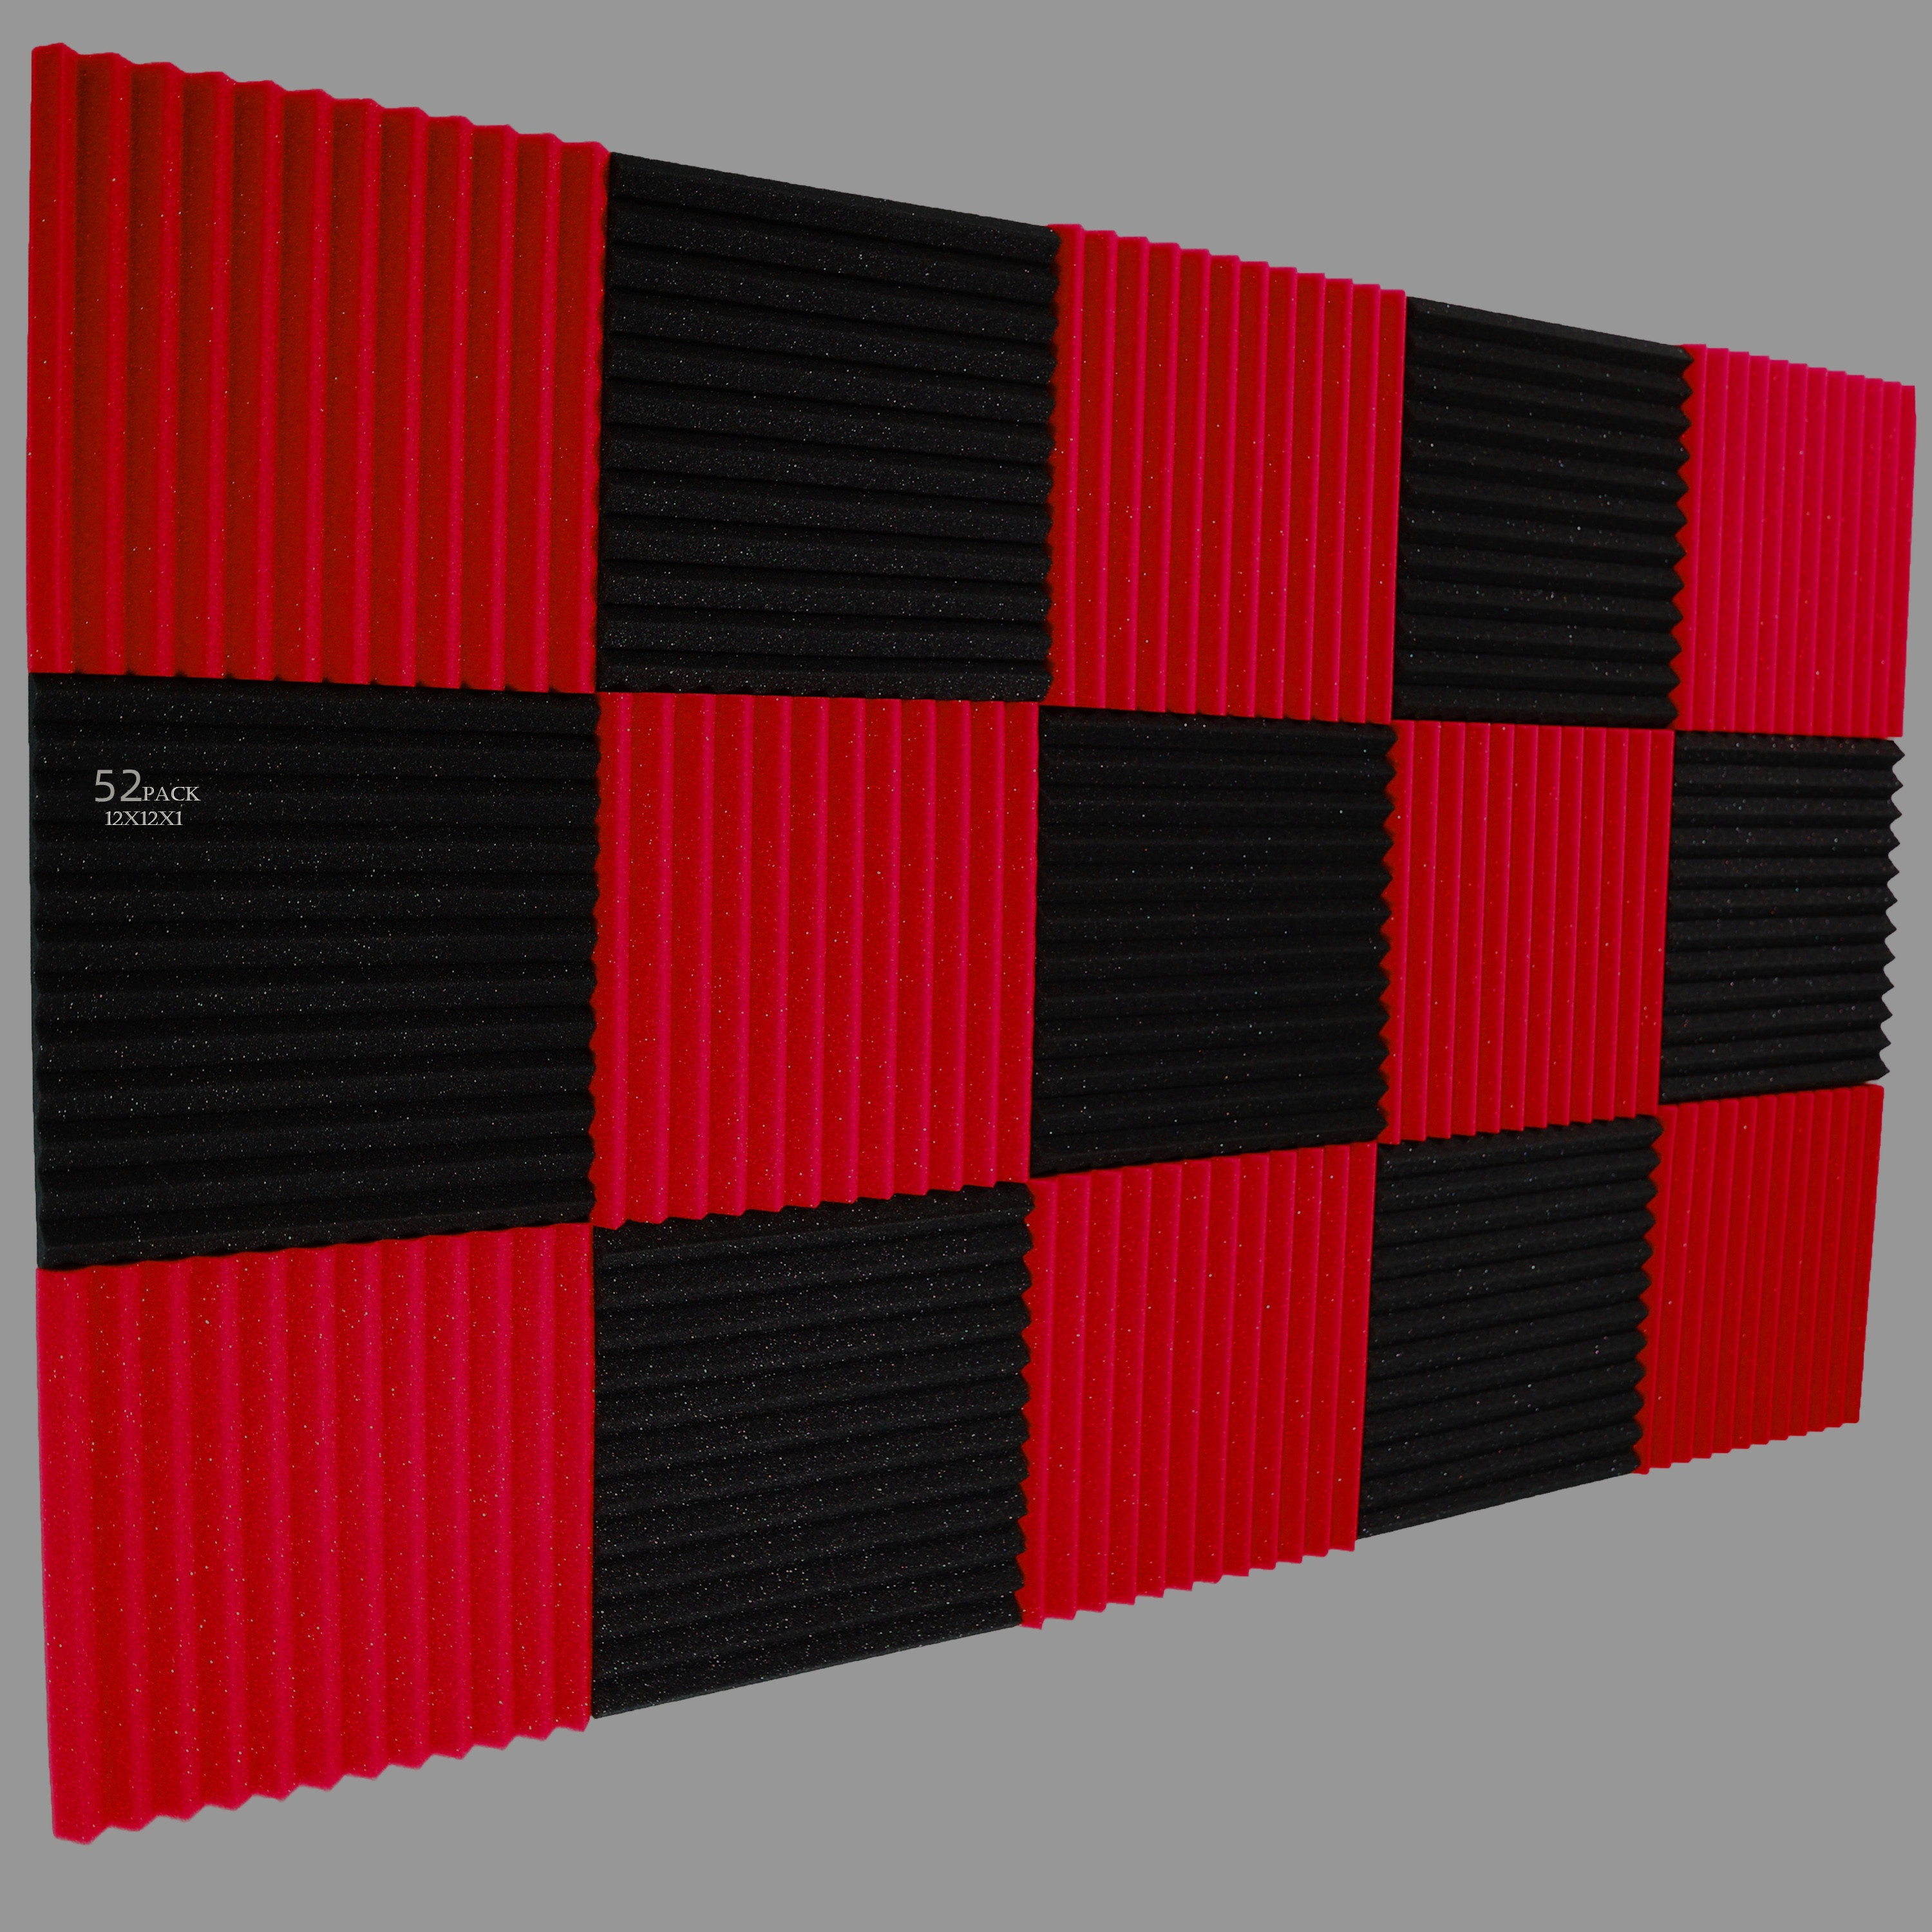 

52packs Black Red Wedge Accoustic Foam Panel 12''x12''x1'' Studio Home Theater Live Streaming Setup Absorbing Diffusing Sound Mid High Frequency Ranges Adhesive Double Side Nano Tape